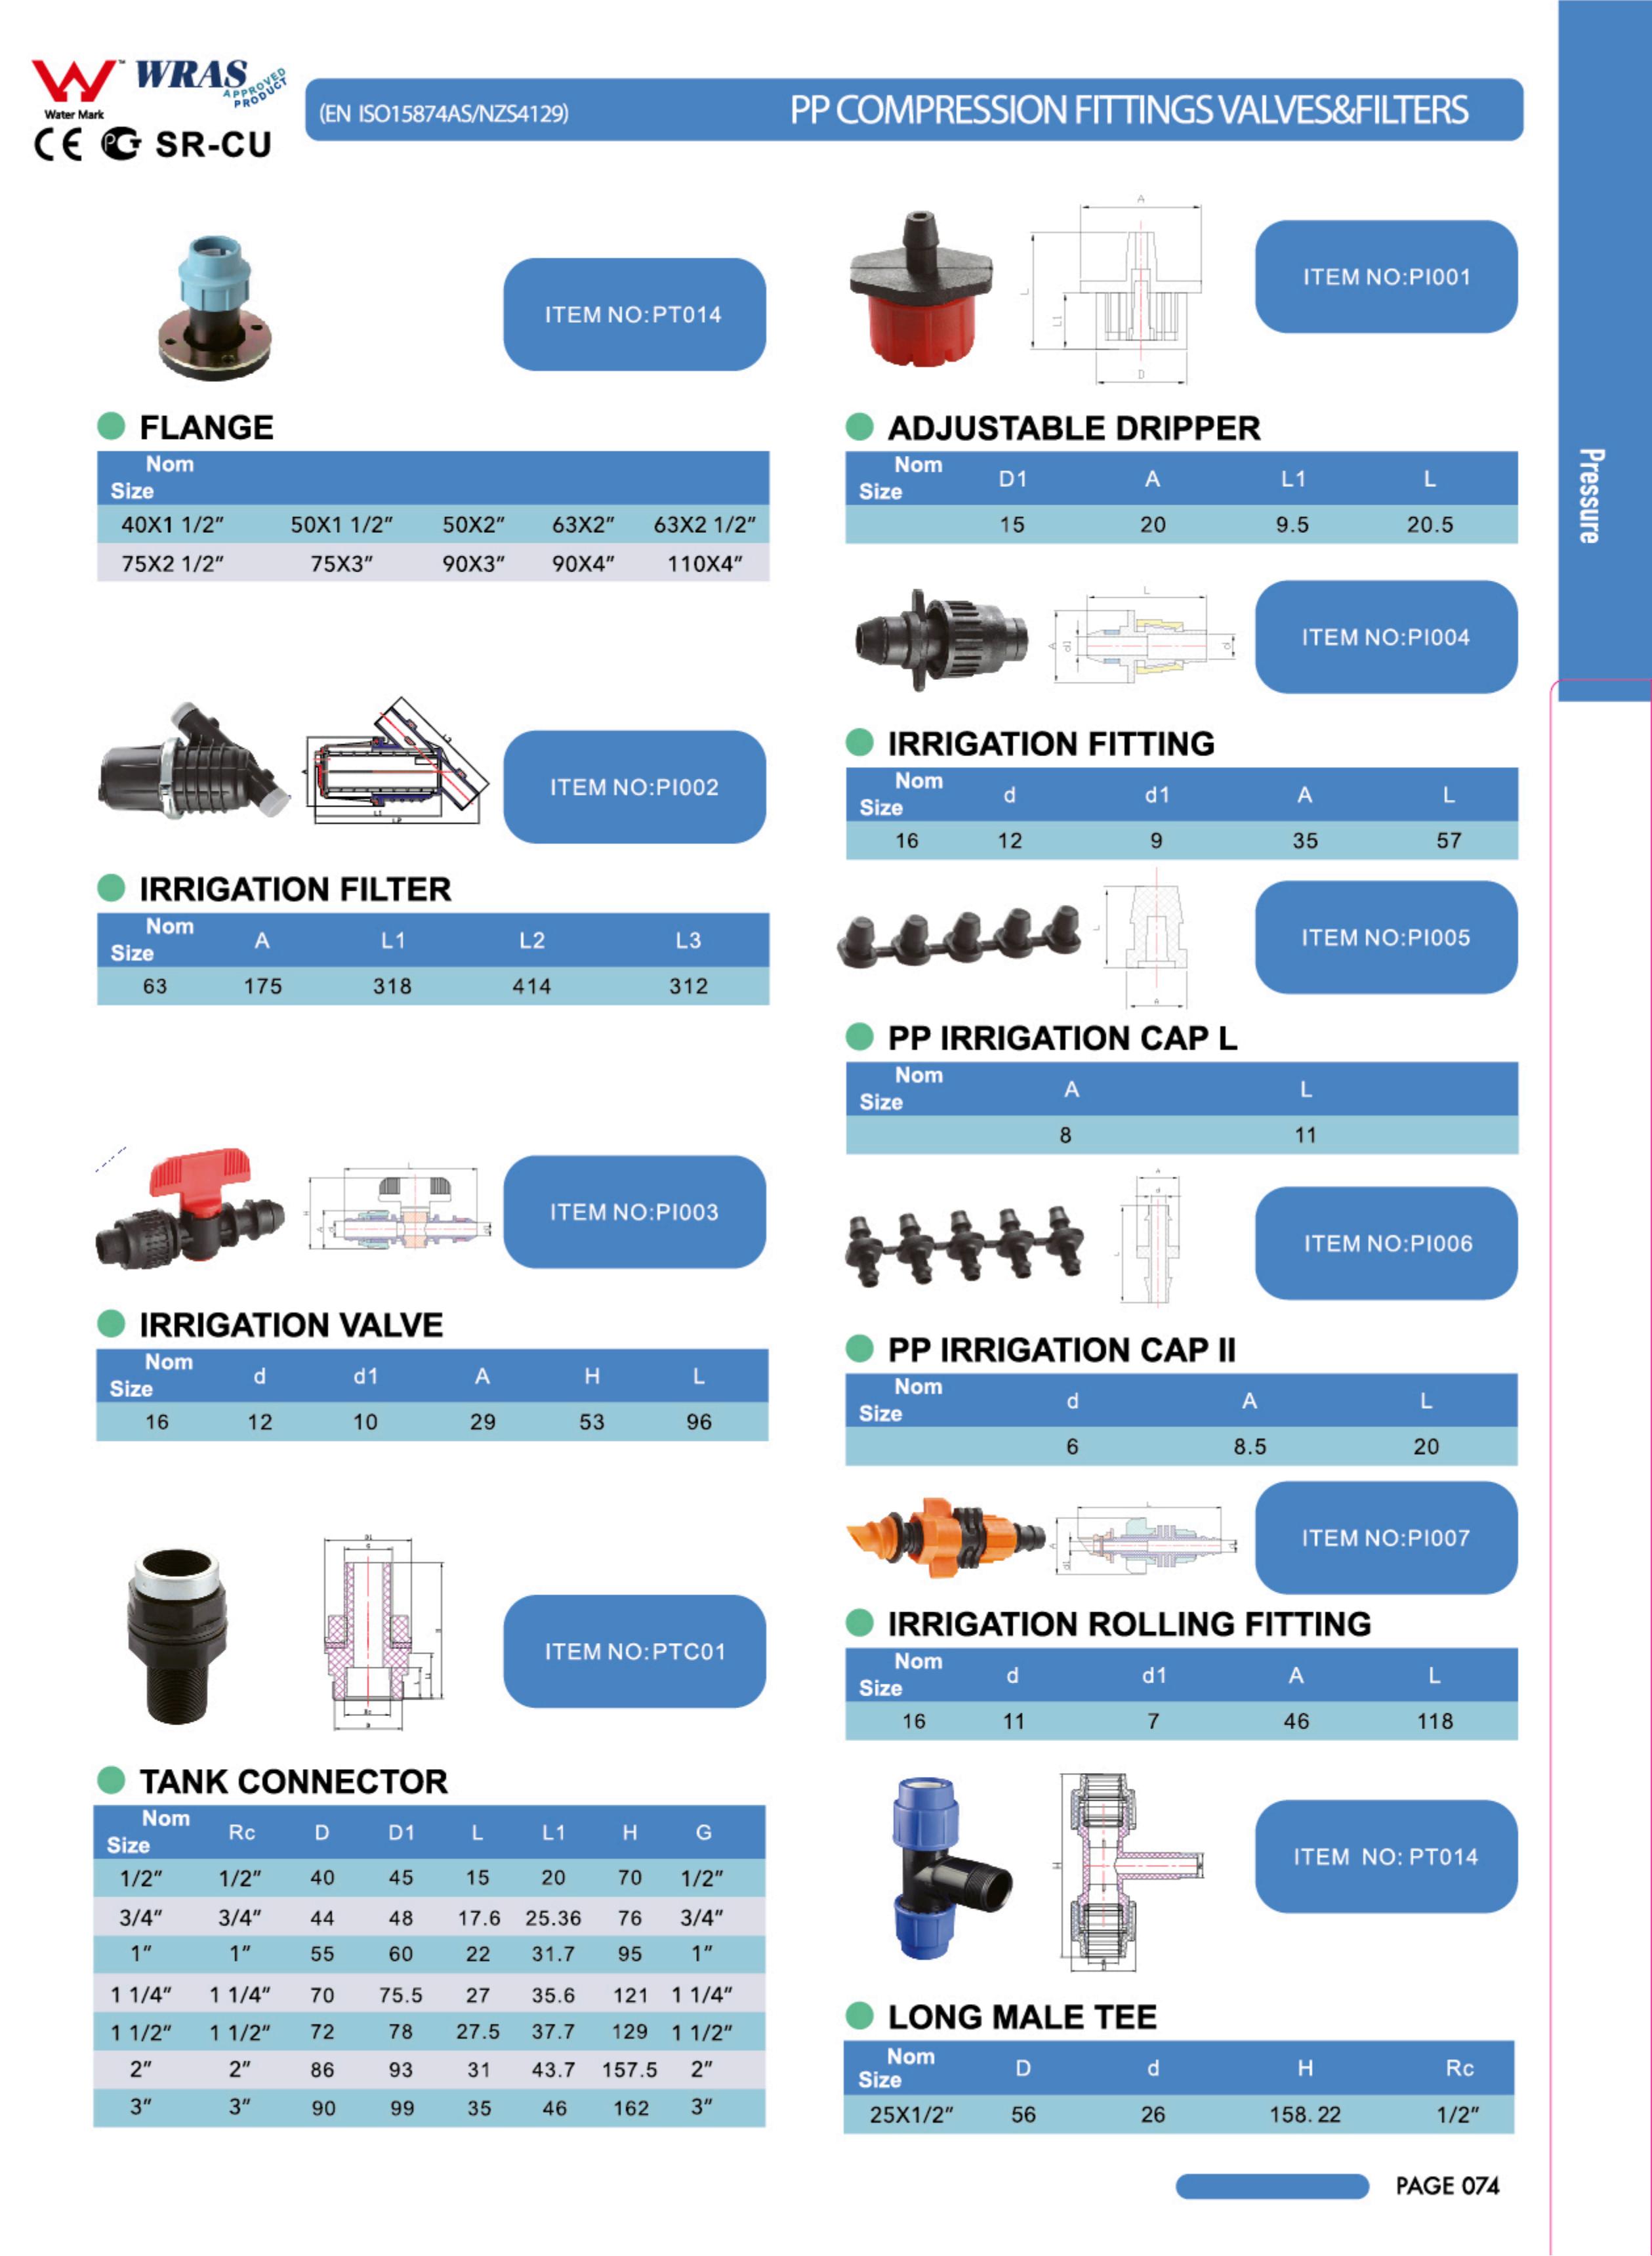 PP COMPRESSION FITTINGS AND VALVES